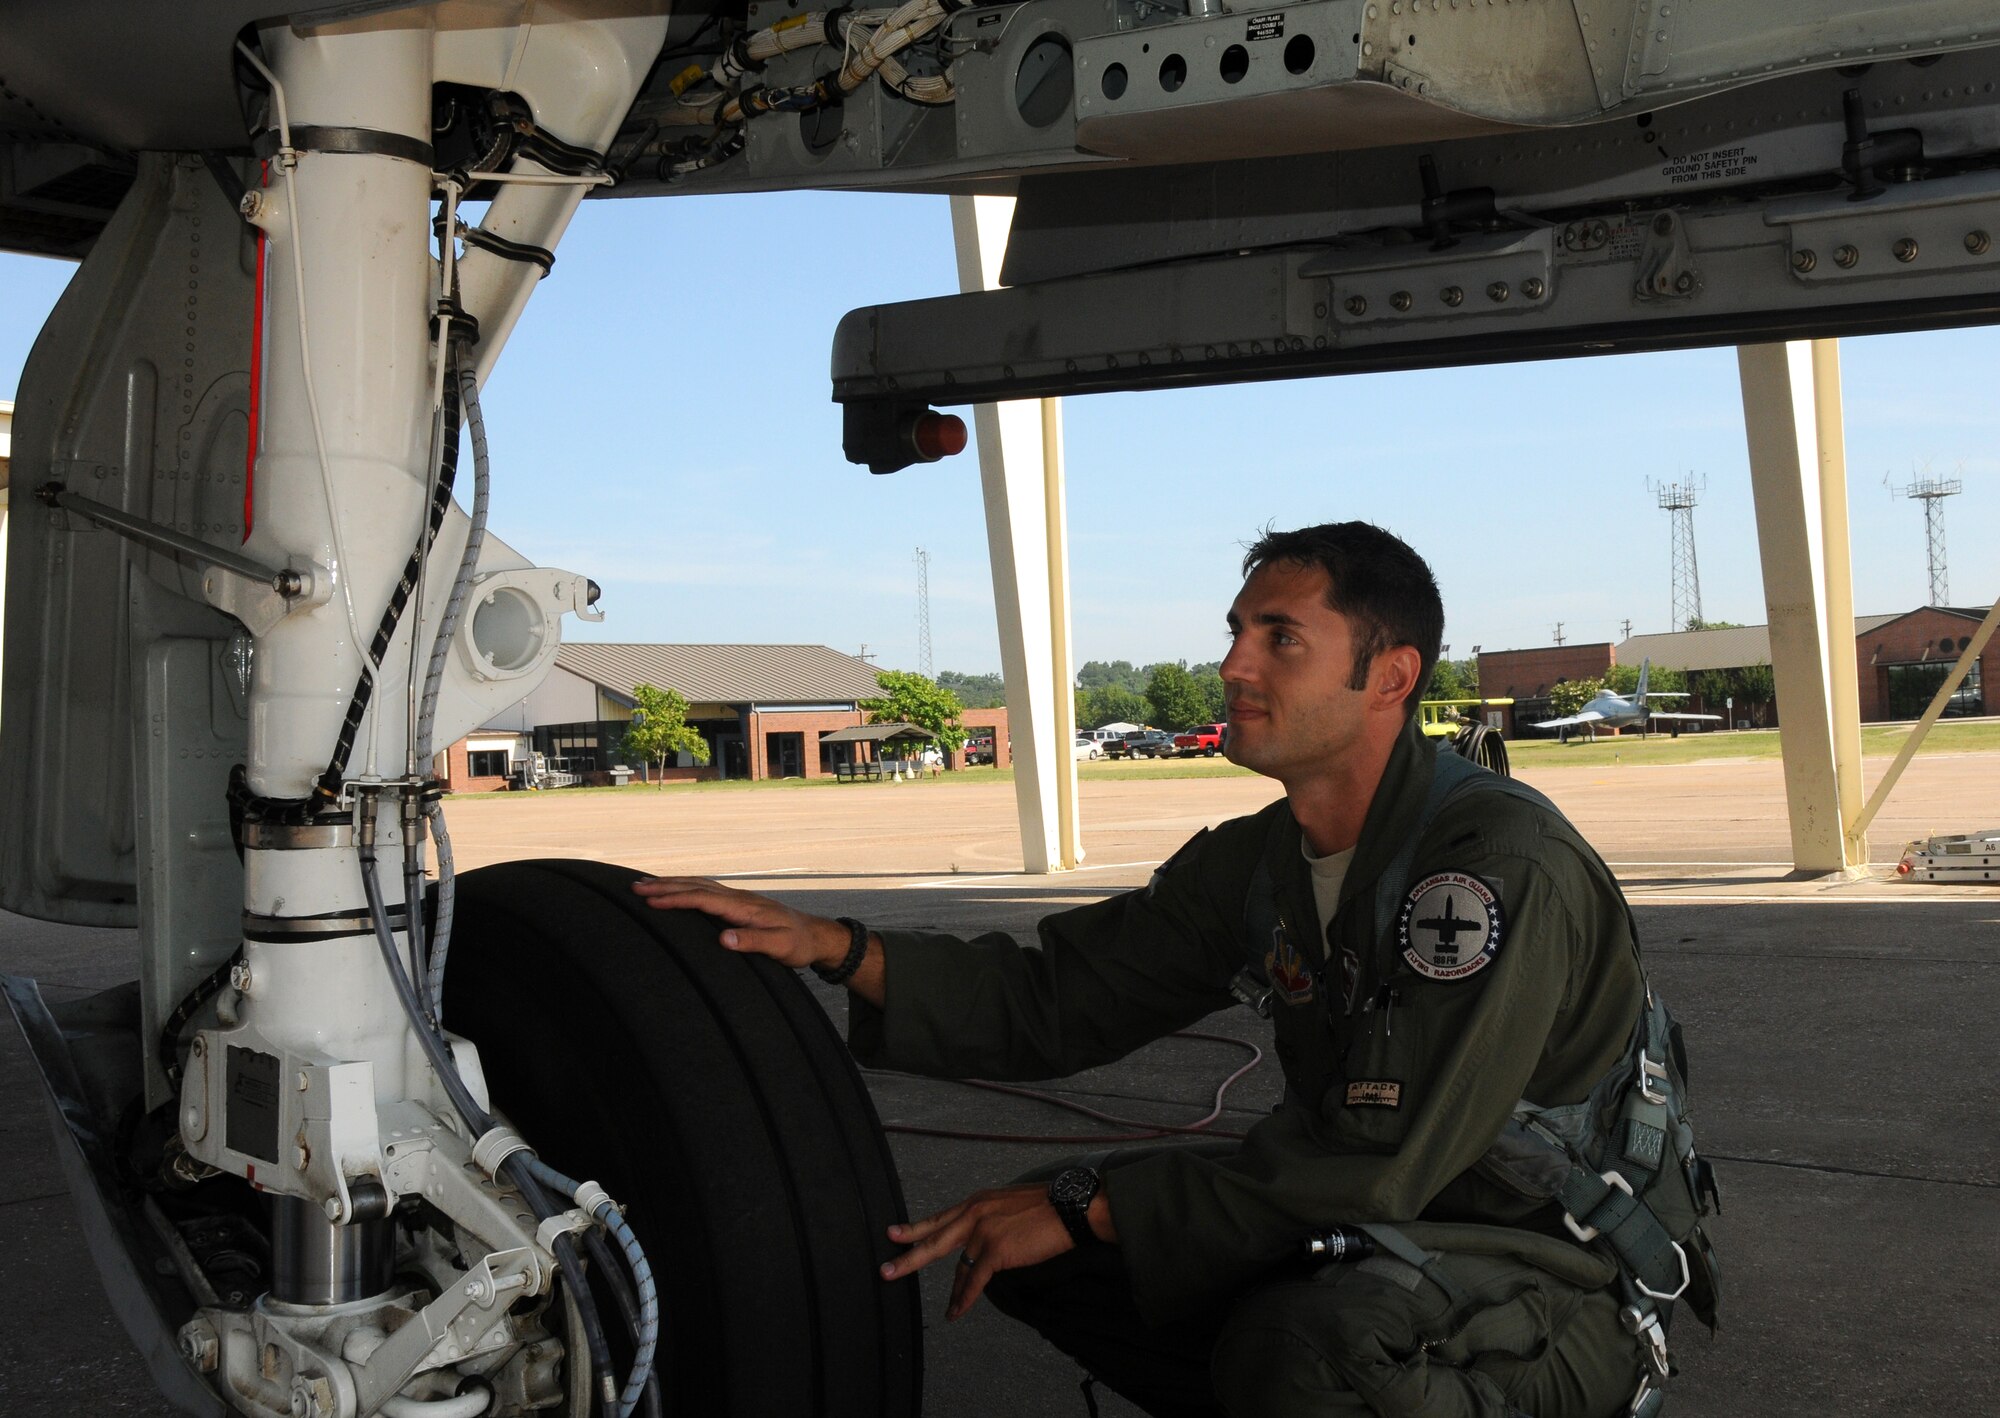 1st Lt. Matthew Cooley, an A-10C Thunderbolt II “Warthog” pilot with the 188th Fighter Wing’s 184th Fighter Squadron was selected as the Flying Razorback spotlight for August 2013. (U.S. Air National Guard photo by Senior Airman John Hillier/188th Fighter Wing Public Affairs)